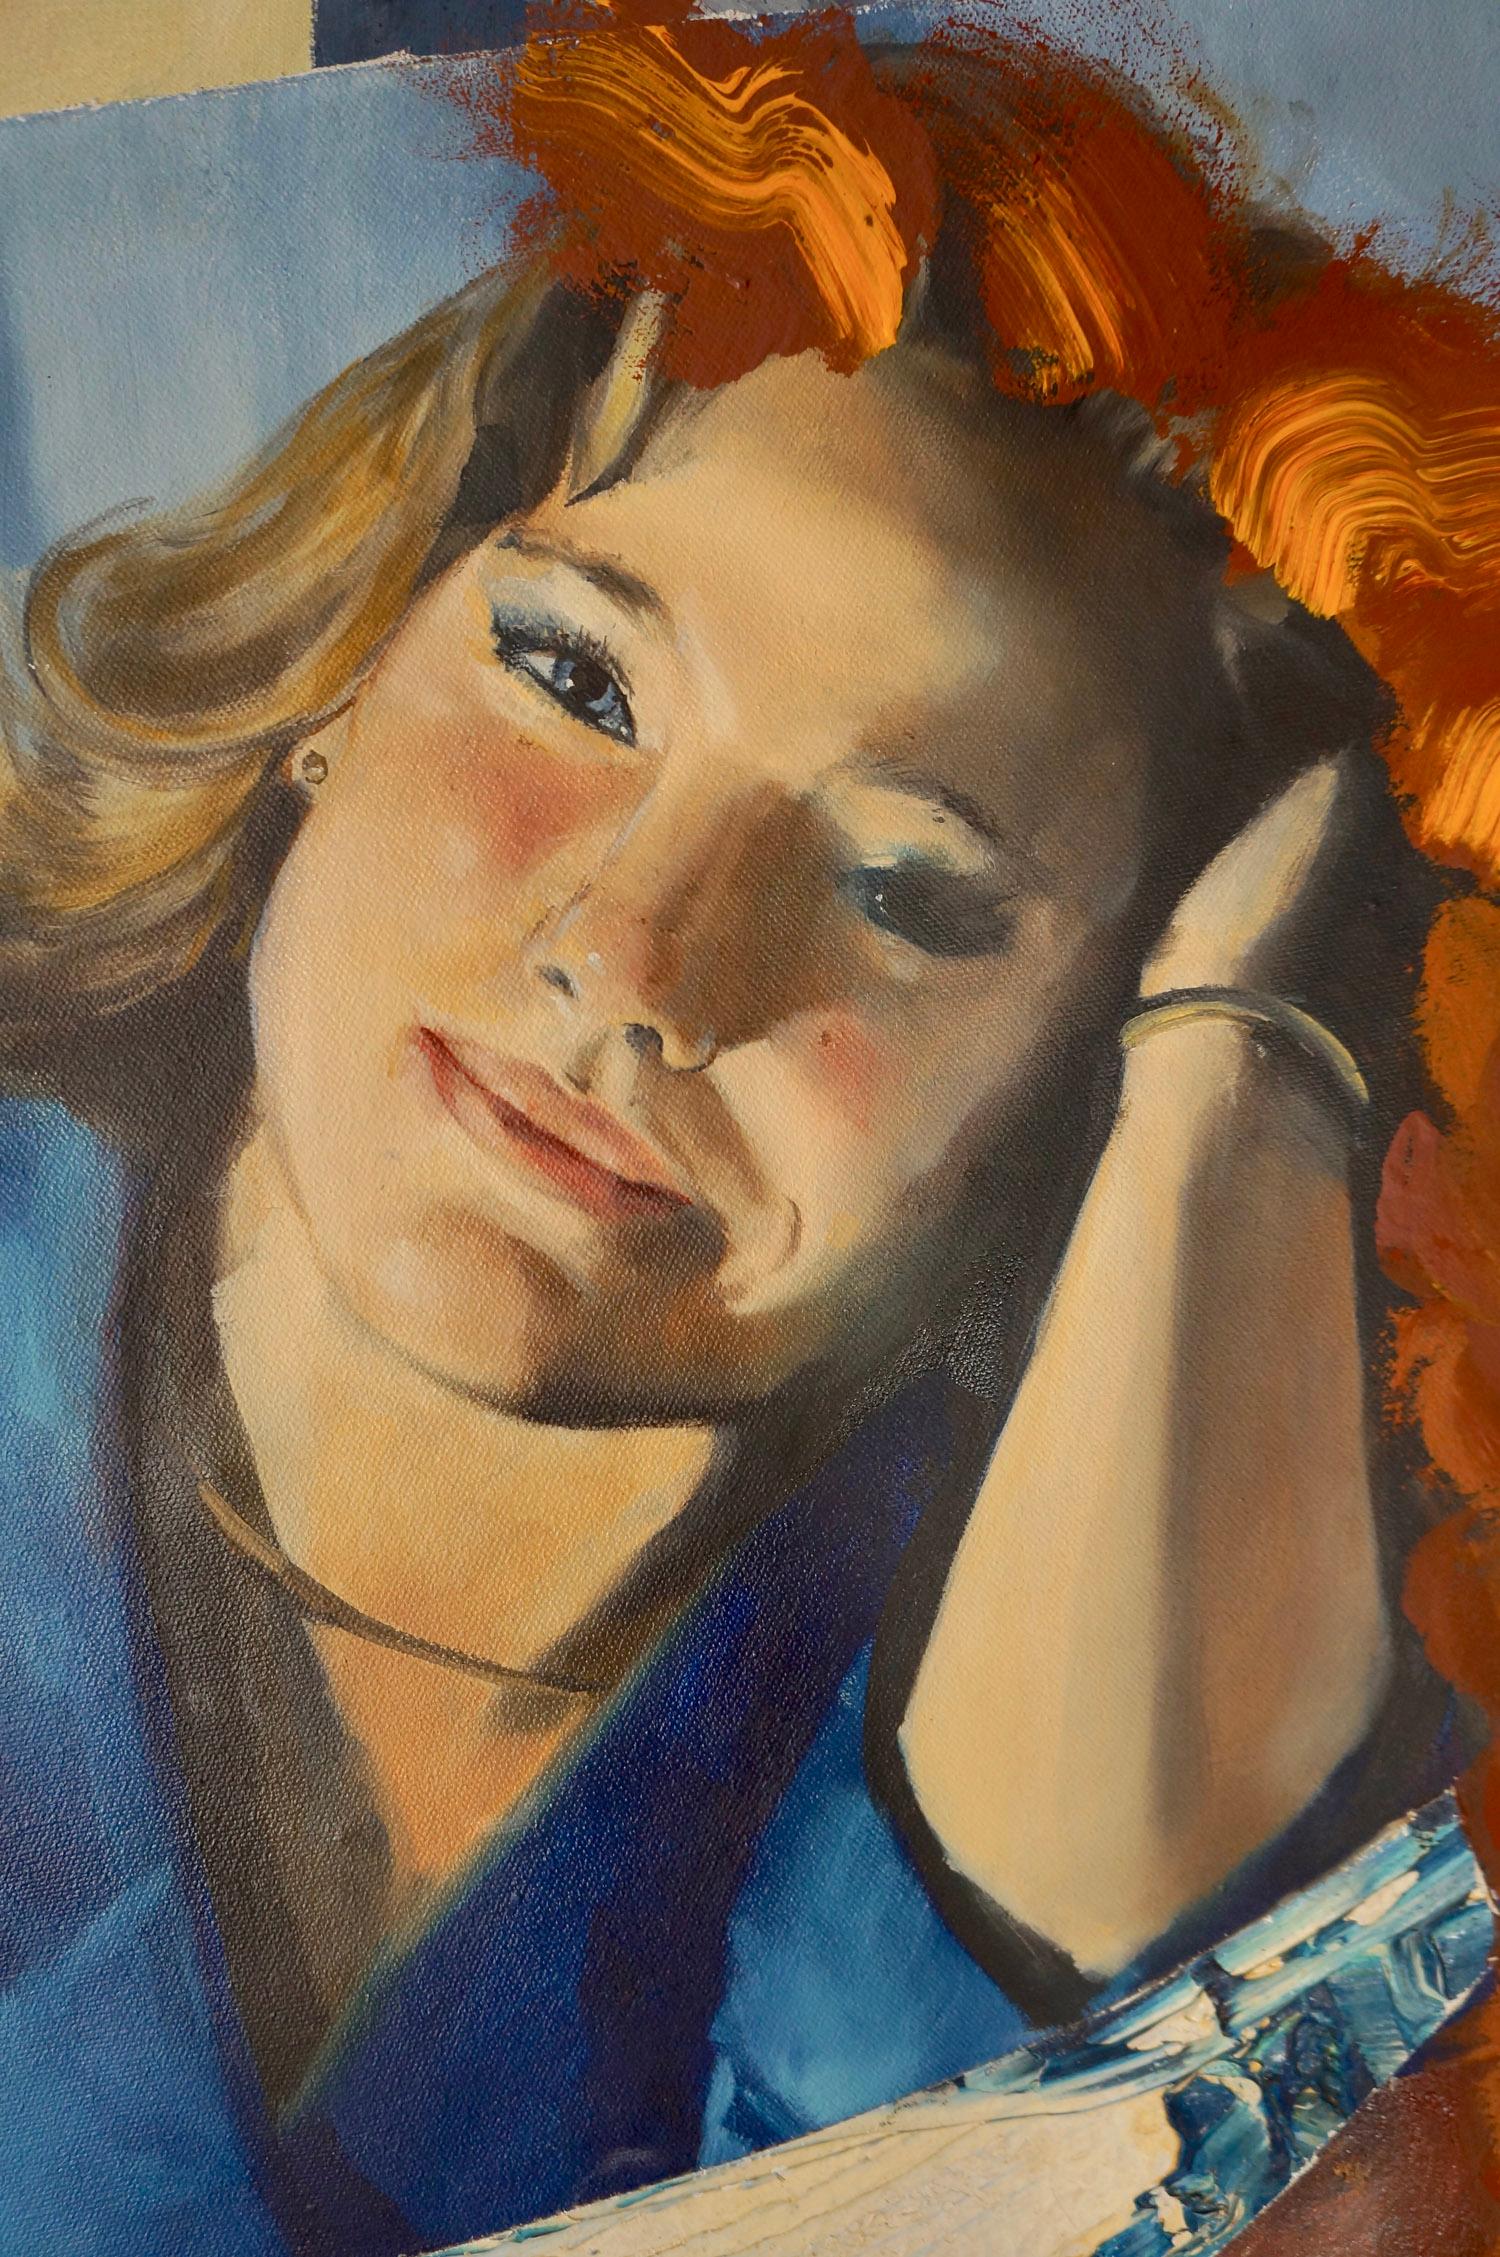 John Baker’s “Shooting the Rapids” is an acrylic painting on canvas with collage 48.5 x 36 inches in rich blues with auburn and red counterpoints and highlights. The young woman’s mood of contemplative reverie contrasts with the pleased and excited